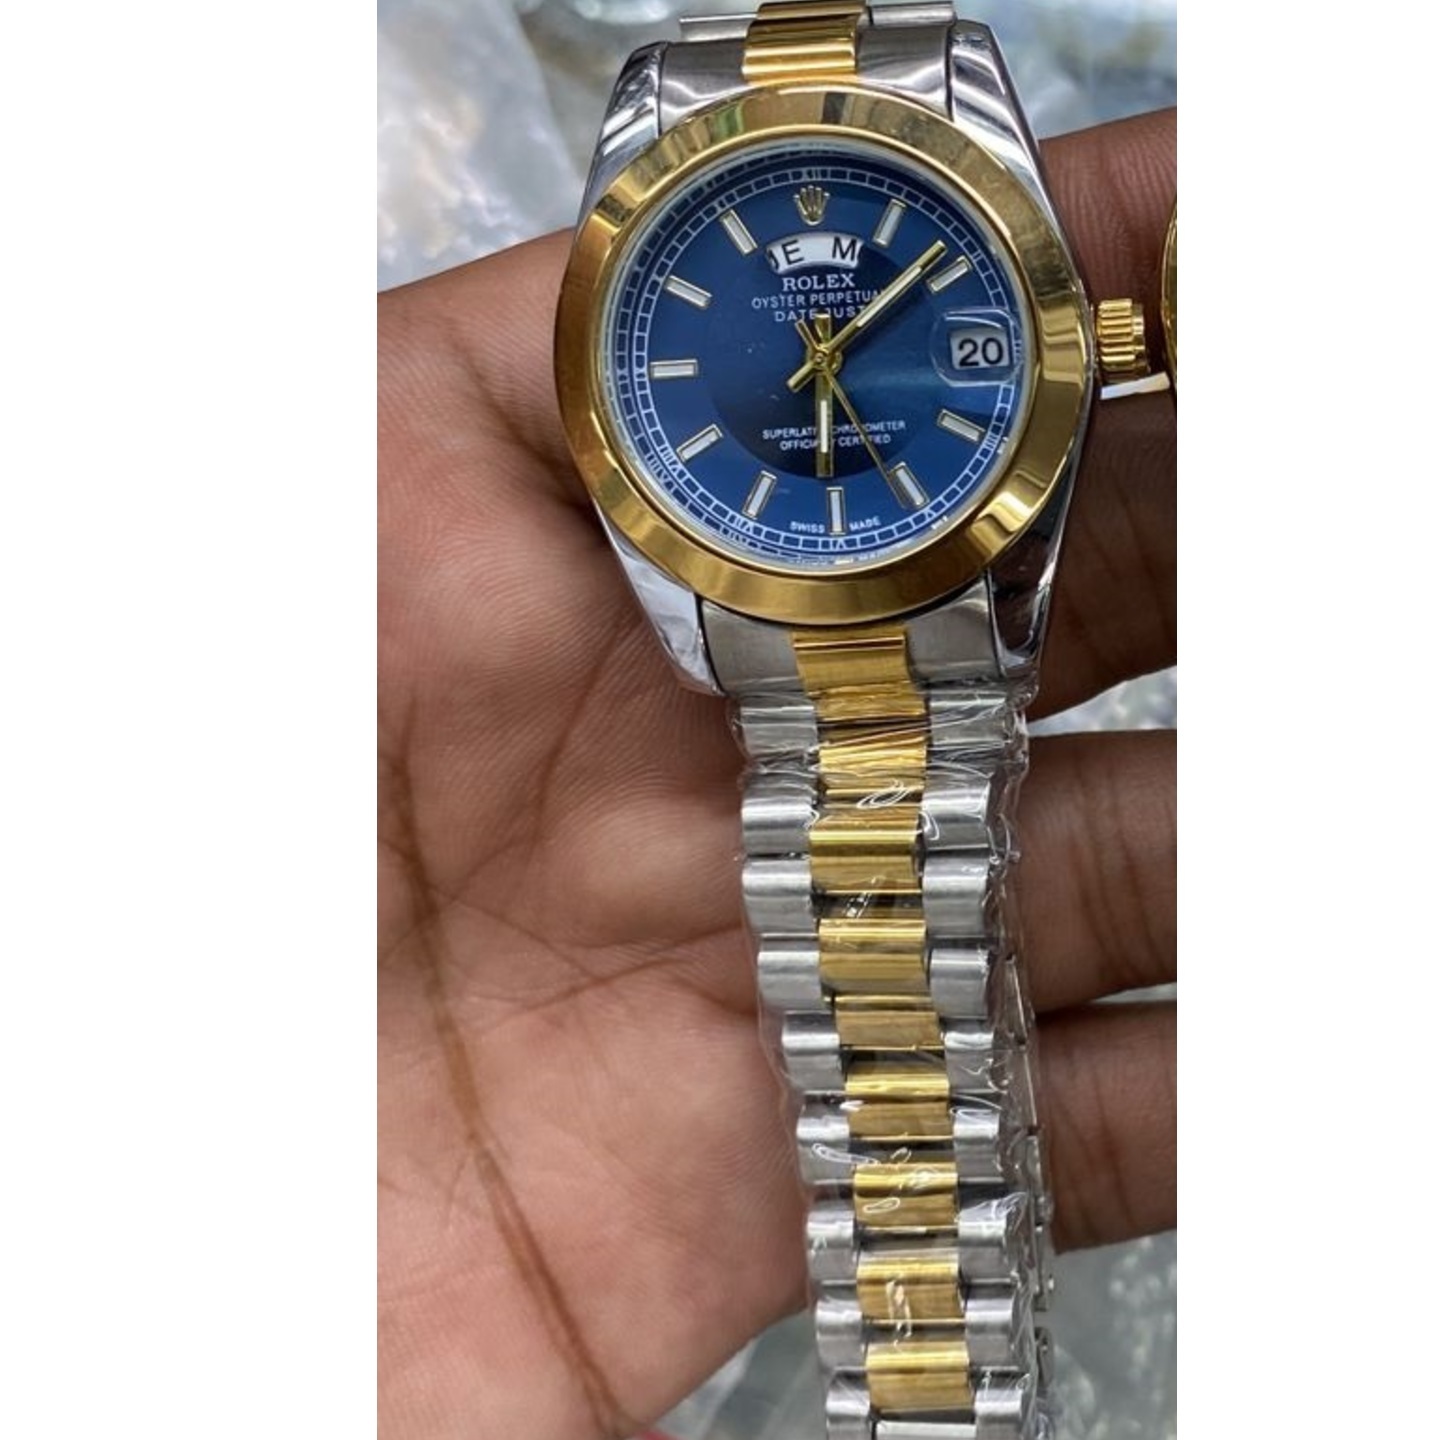 Ladies Rolex Watch Gift Engagement, anniversary, valentines day, mothers day for sister, wife,friend,mother, baby shower